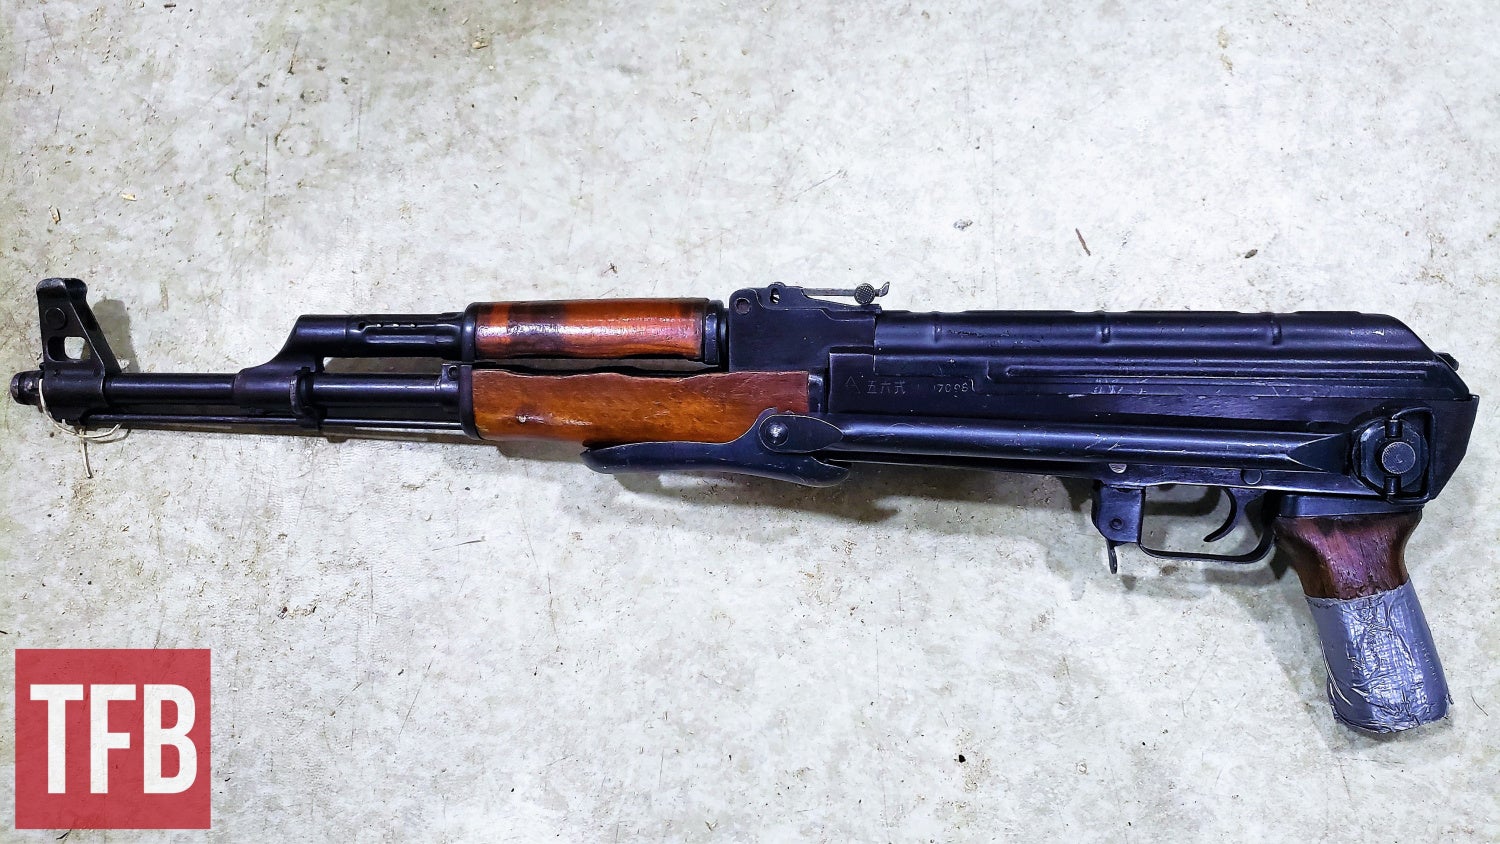 Prime example of the early Chinese AK with Russian made front sight post